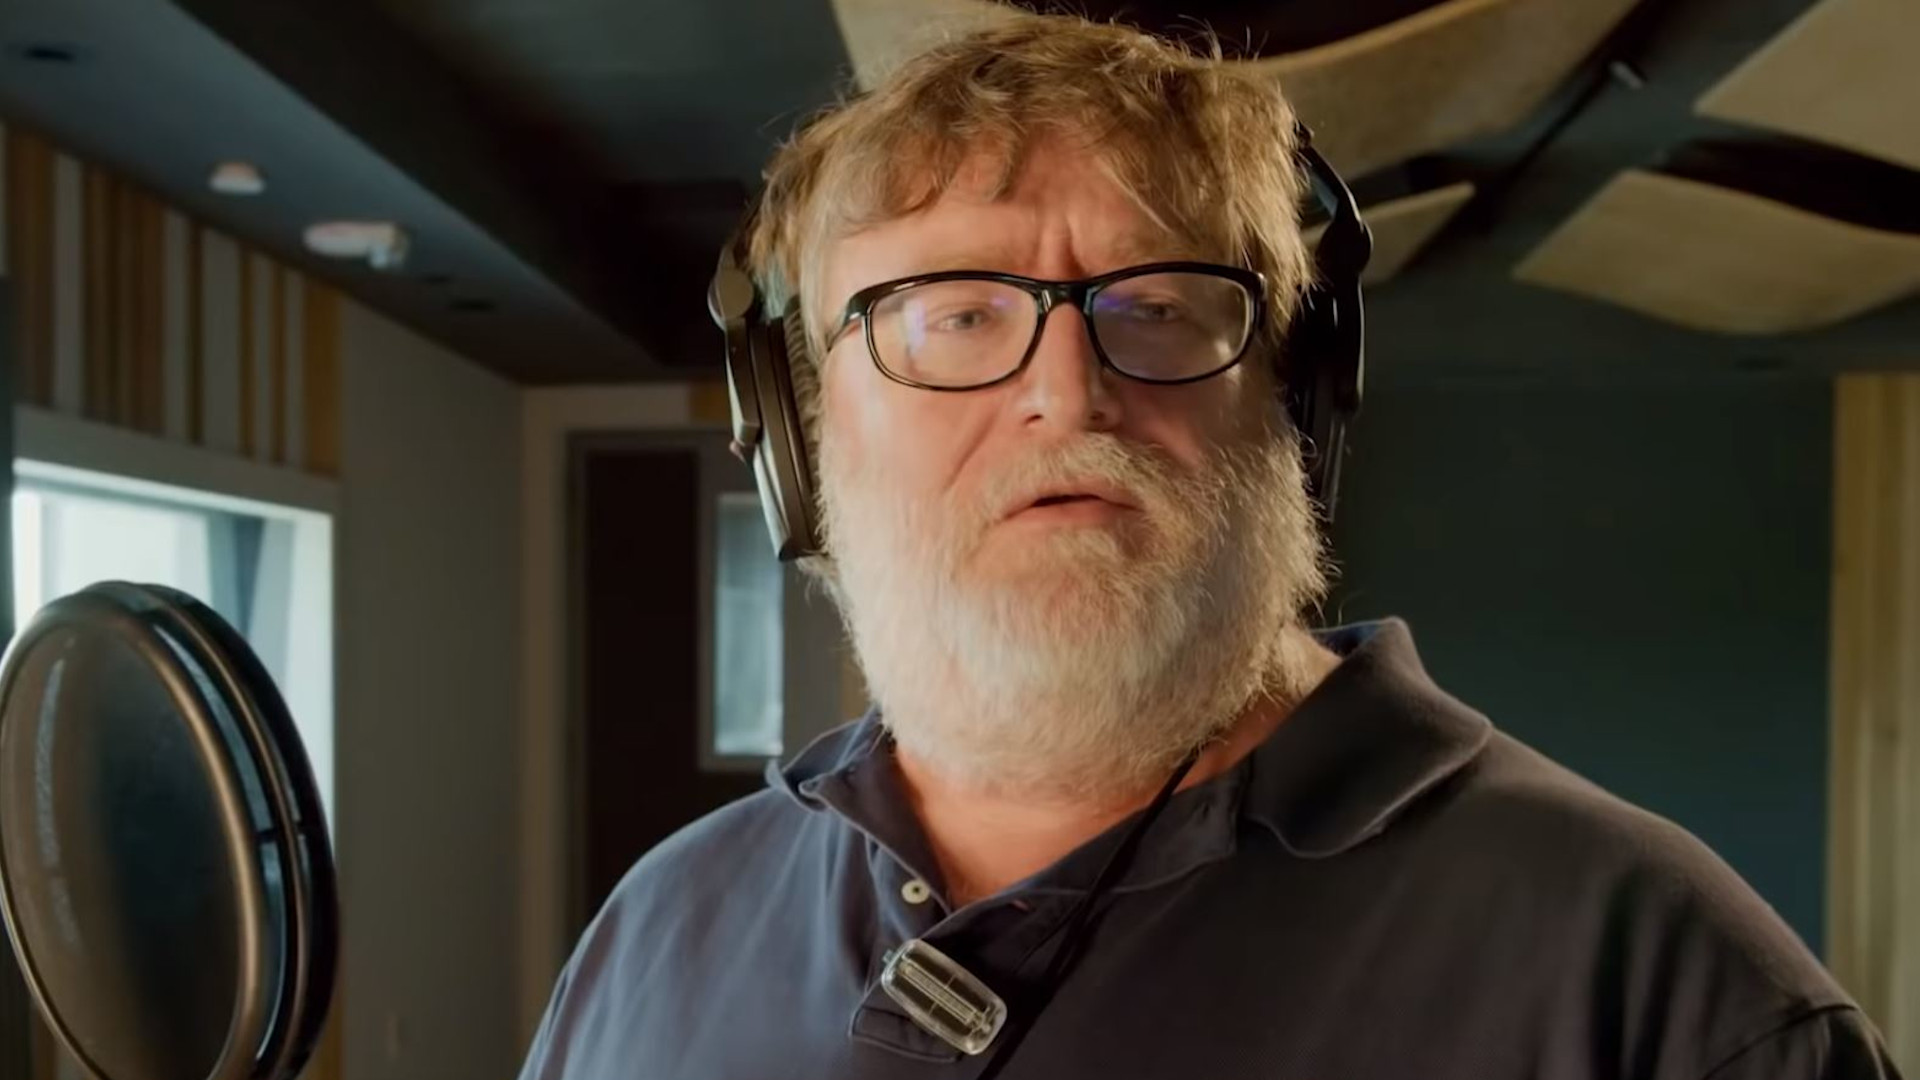 Business of Esports - Valve's Gabe Newell Attacks The Metaverse And NFTs